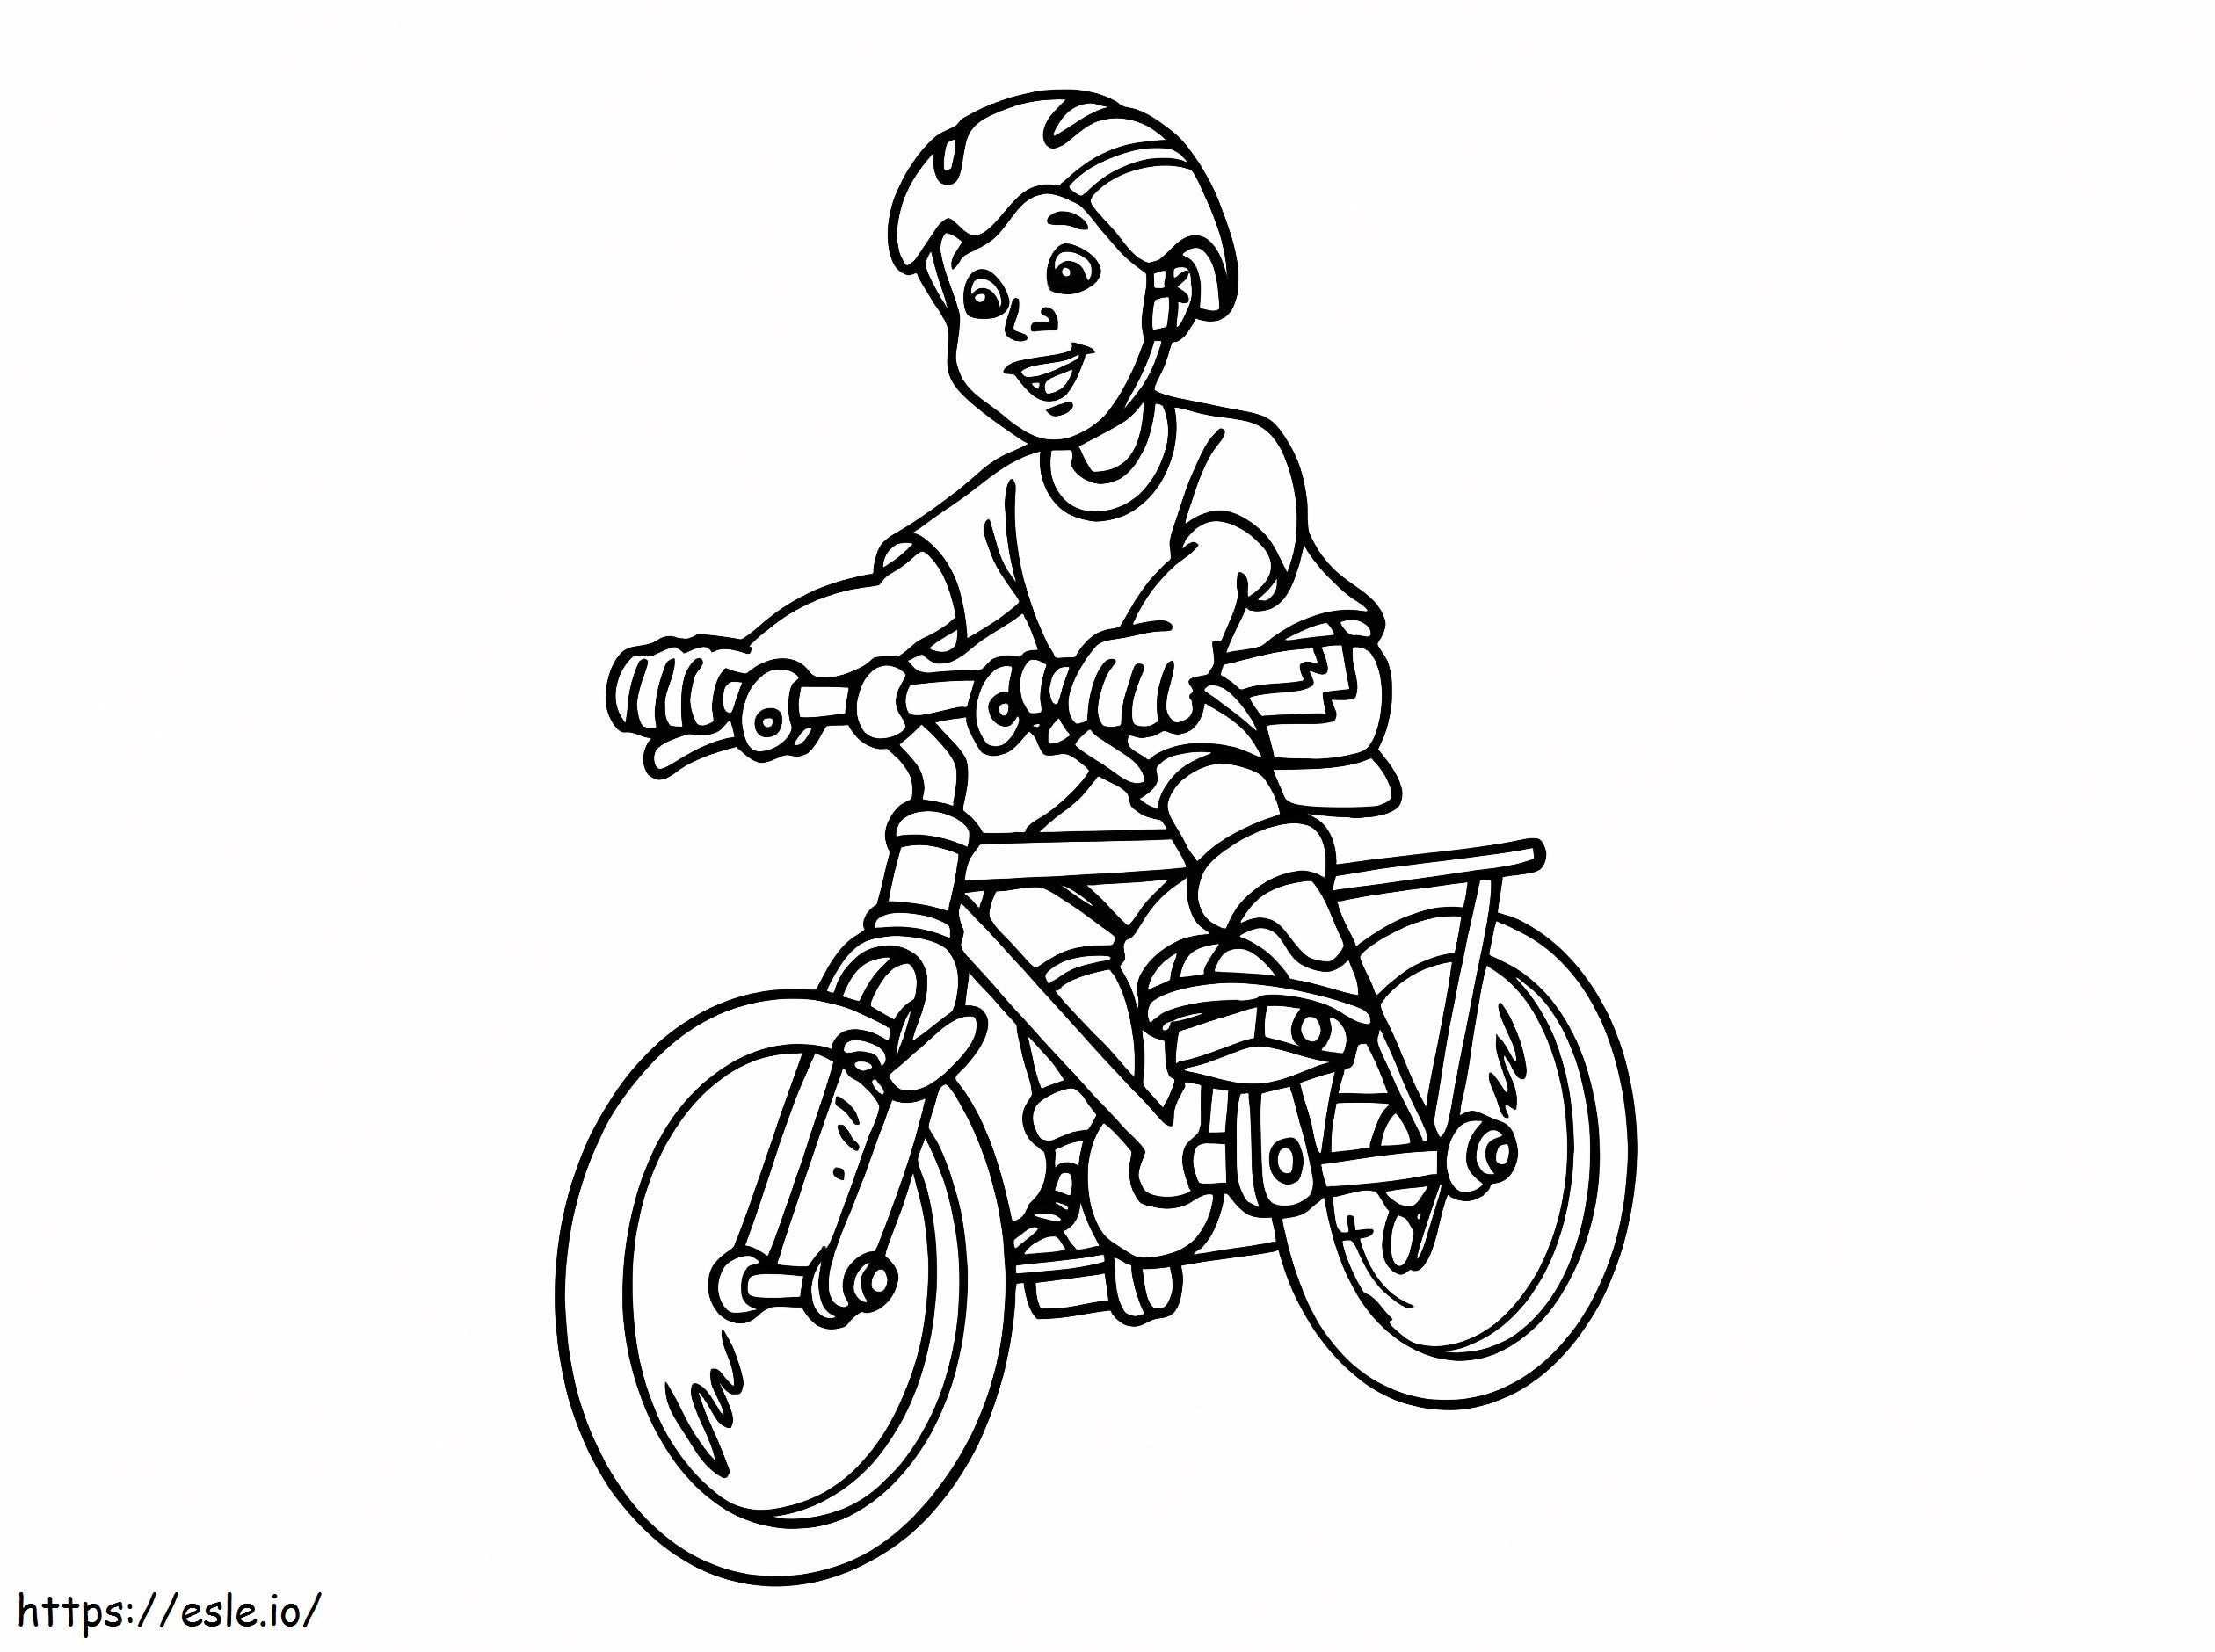 Student Cycling coloring page